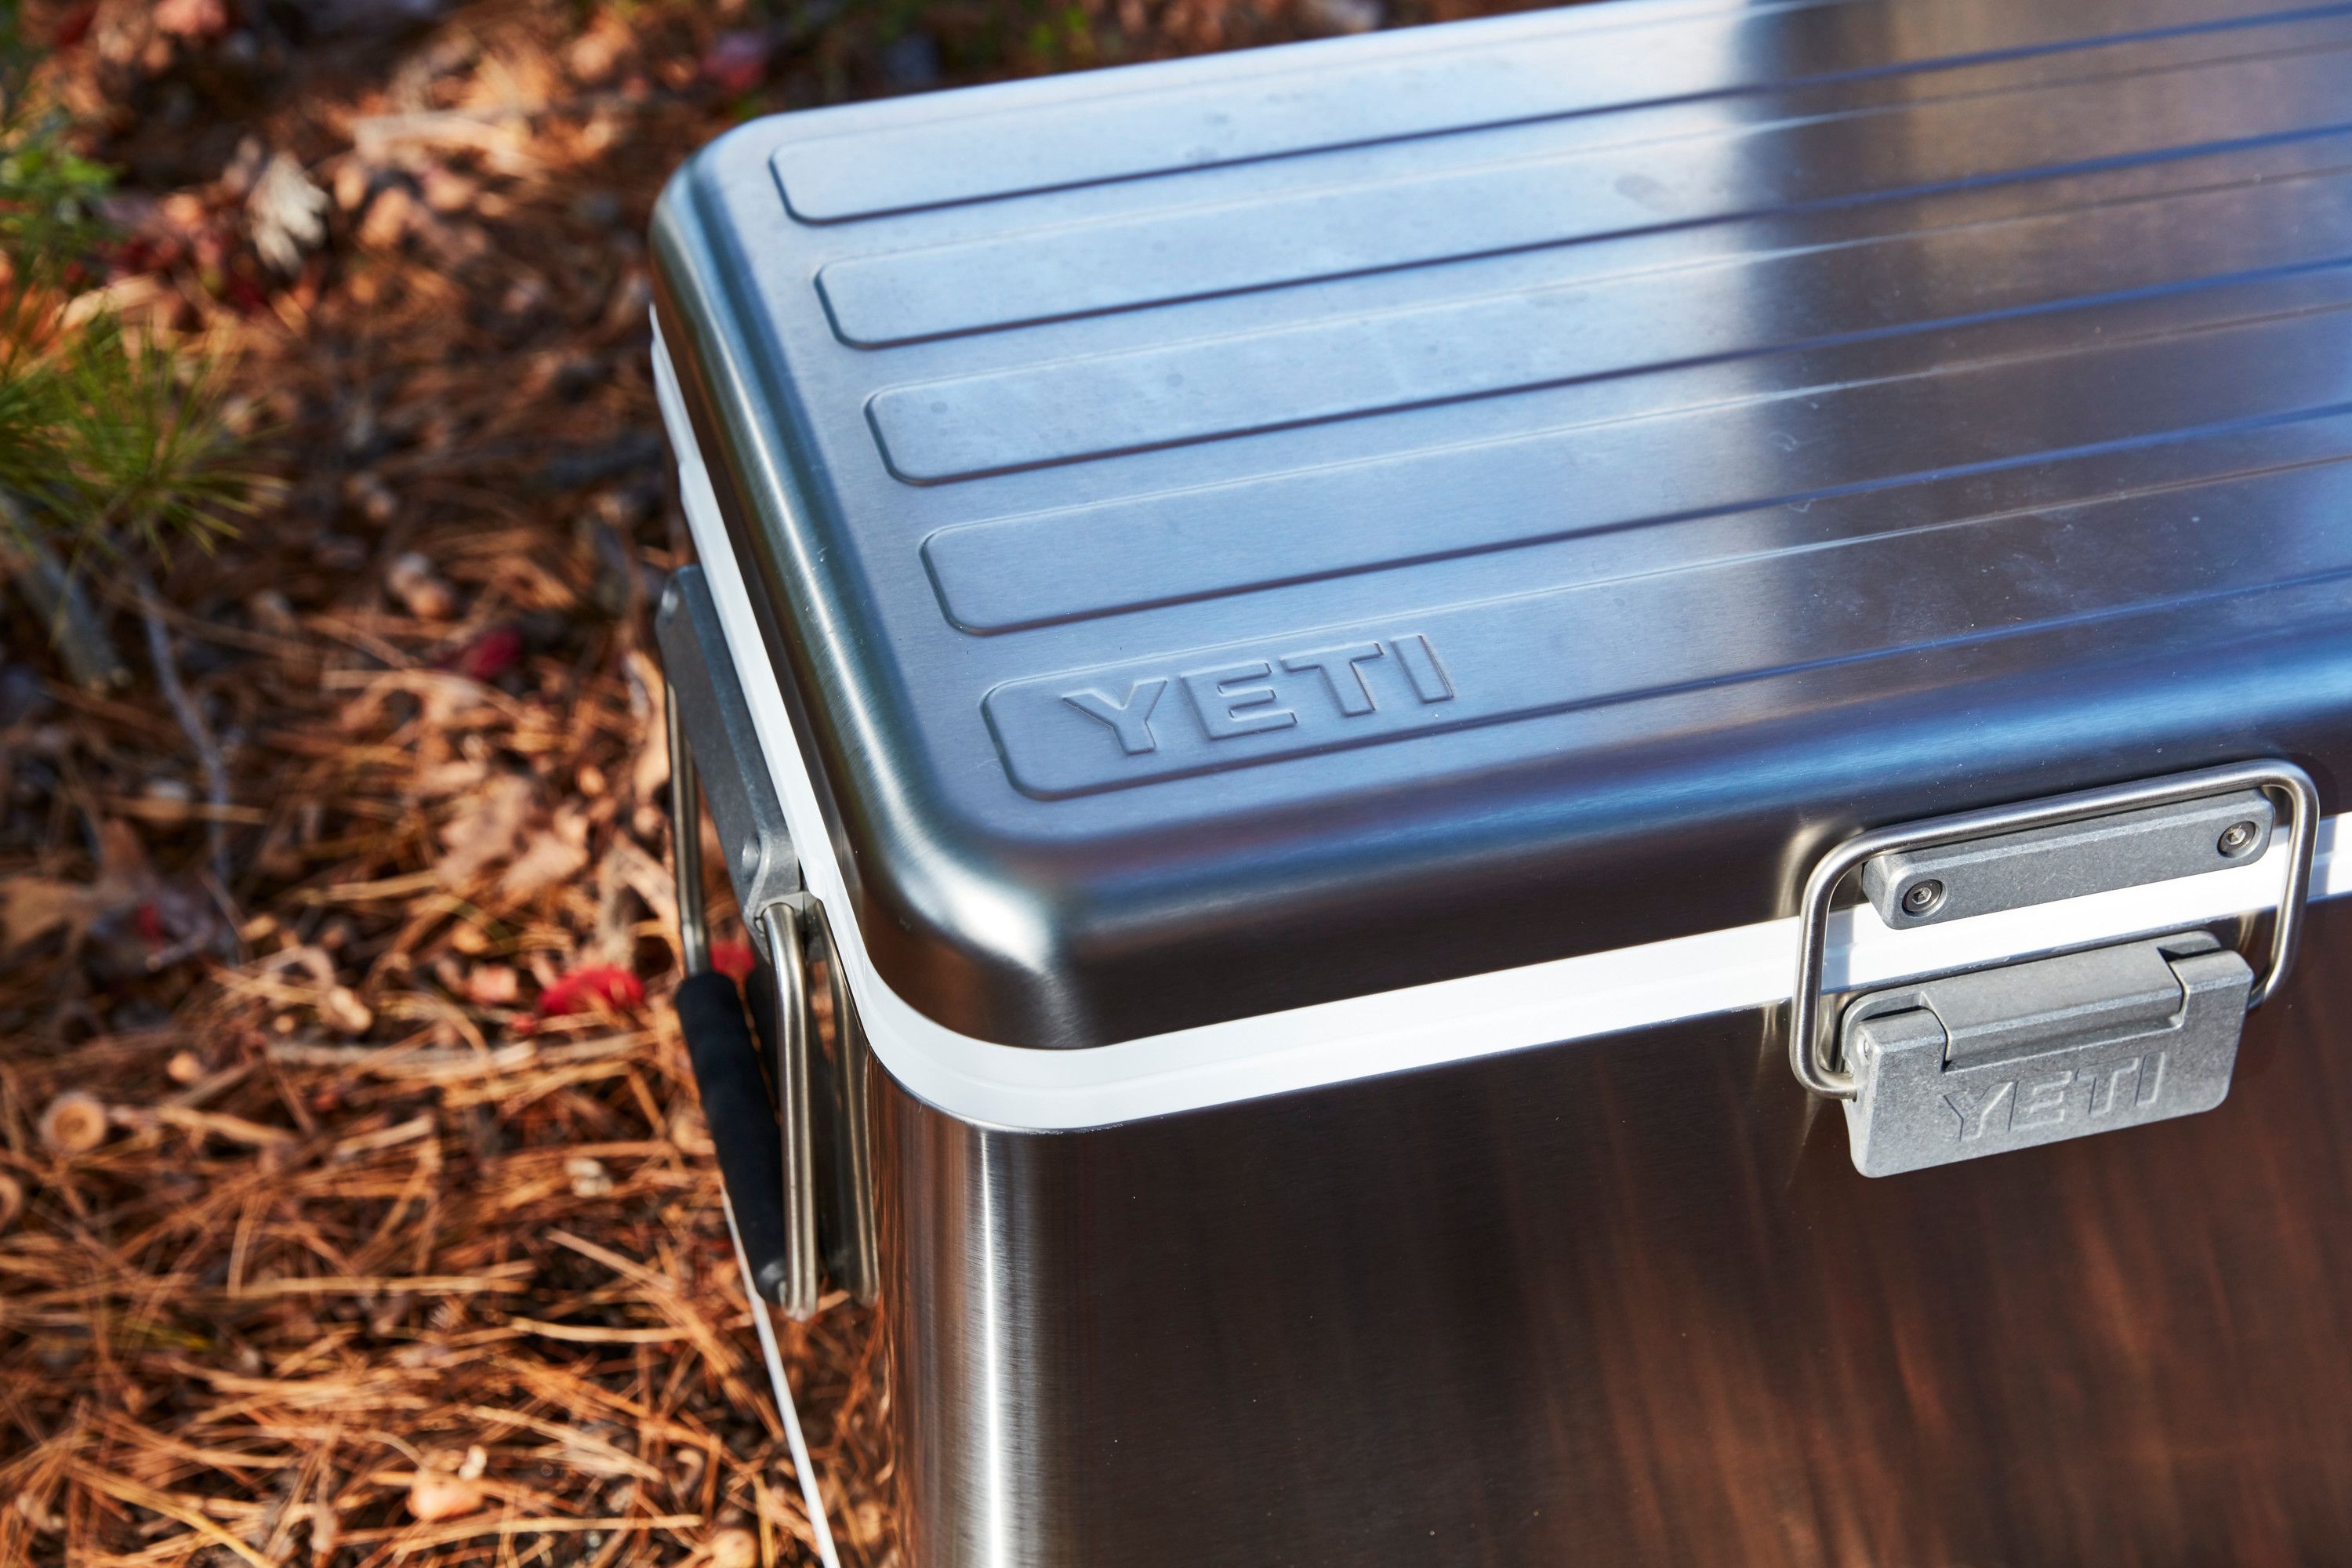 YETI V Series: The 100 Best Inventions of 2020